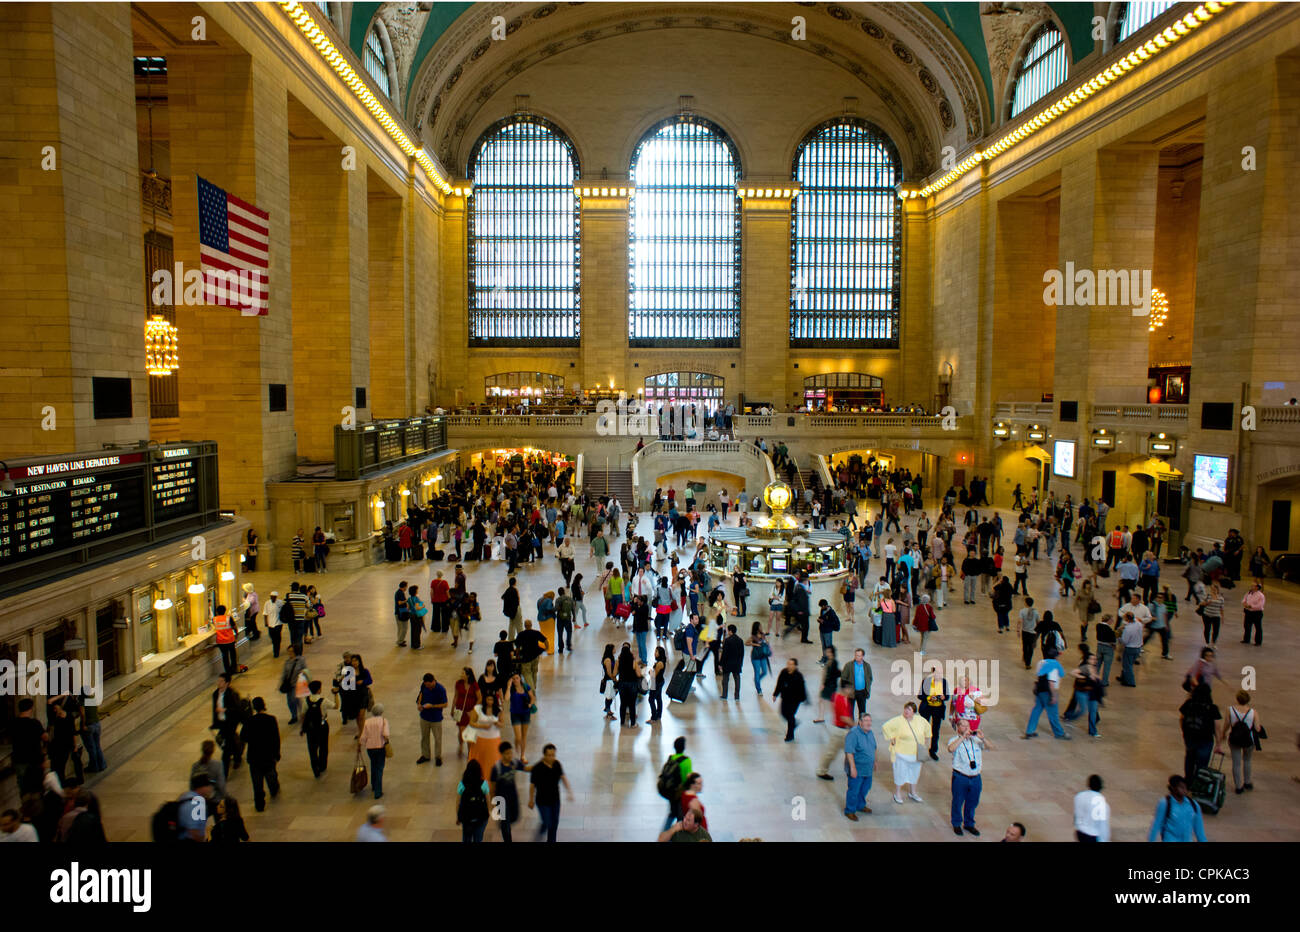 Commuters buying tickets and heading for their trains in Grand Central Station in New York City Stock Photo